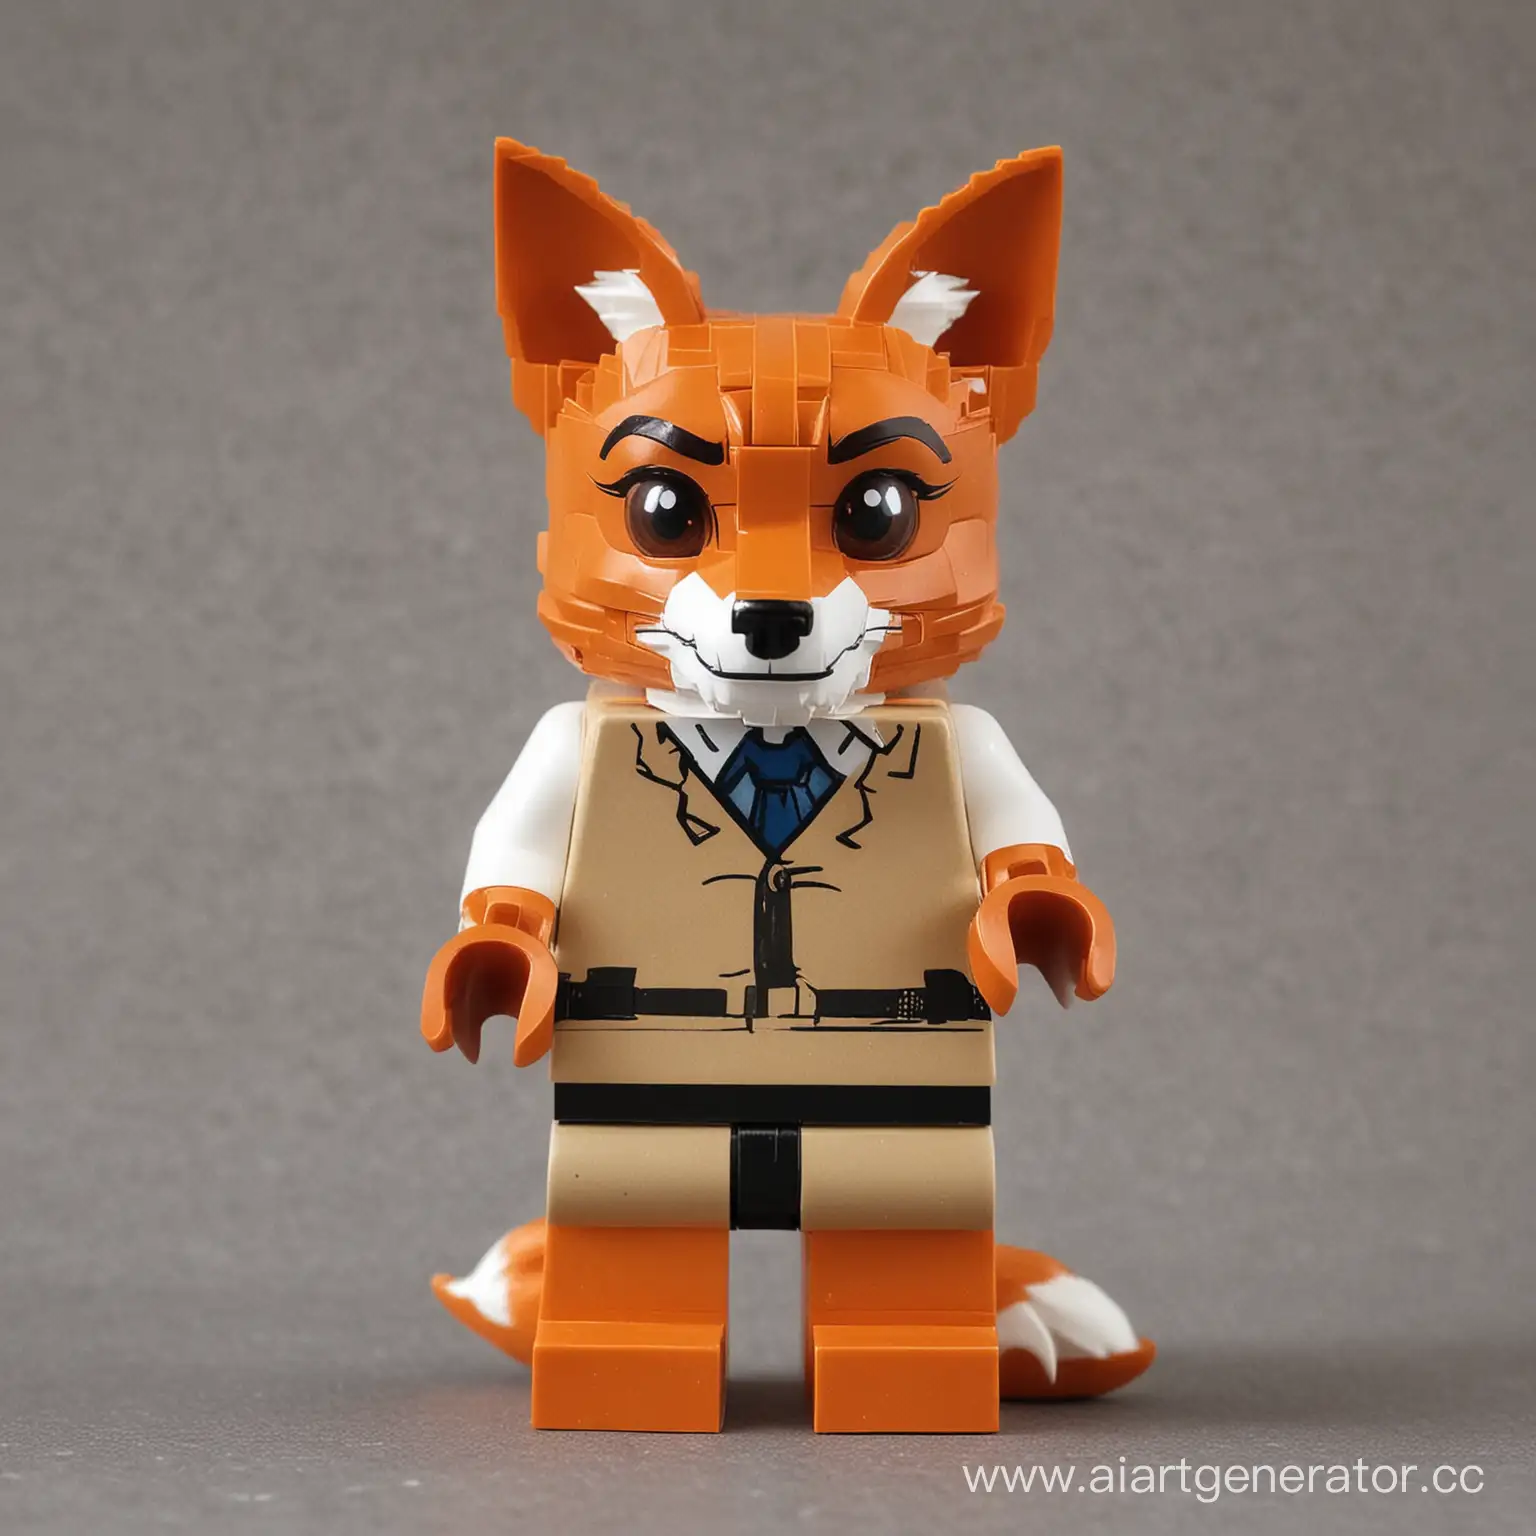 Creative-Foxes-Building-Lego-Constructions-from-Money